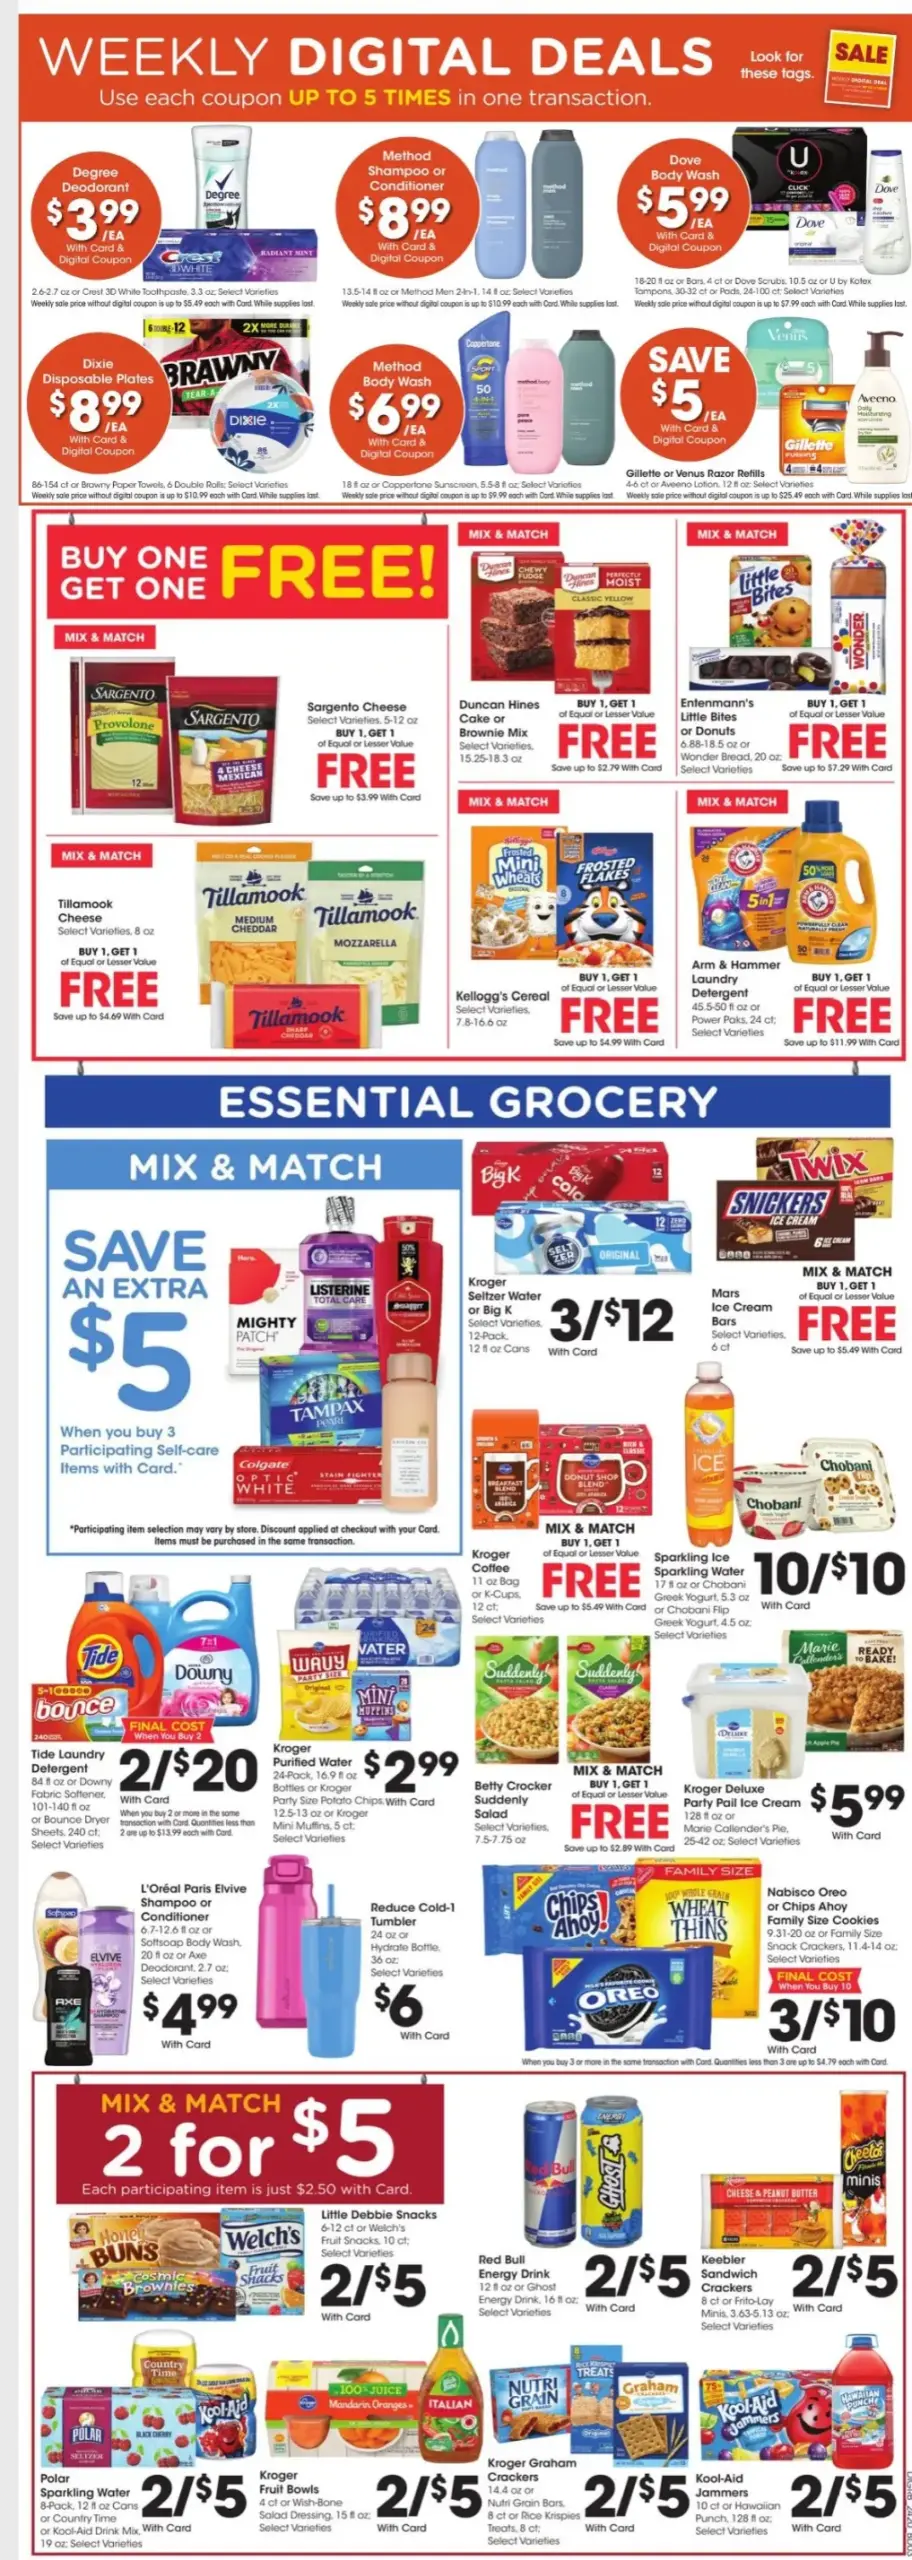 Dillons July 2024 Weekly Sales, Deals, Discounts and Digital Coupons.